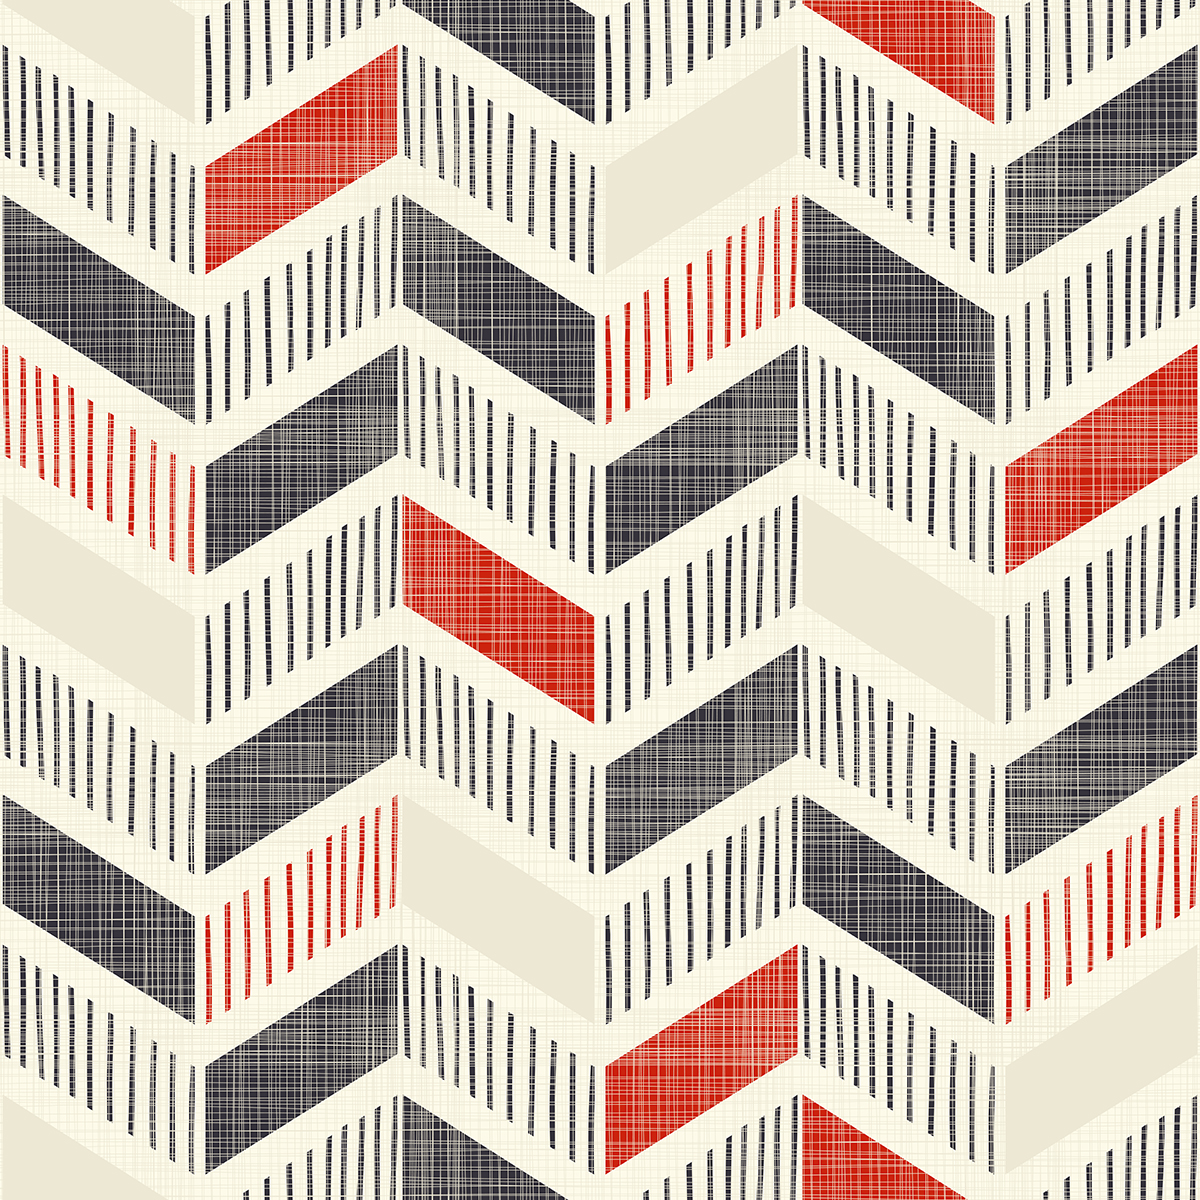 A pattern of red and black lines